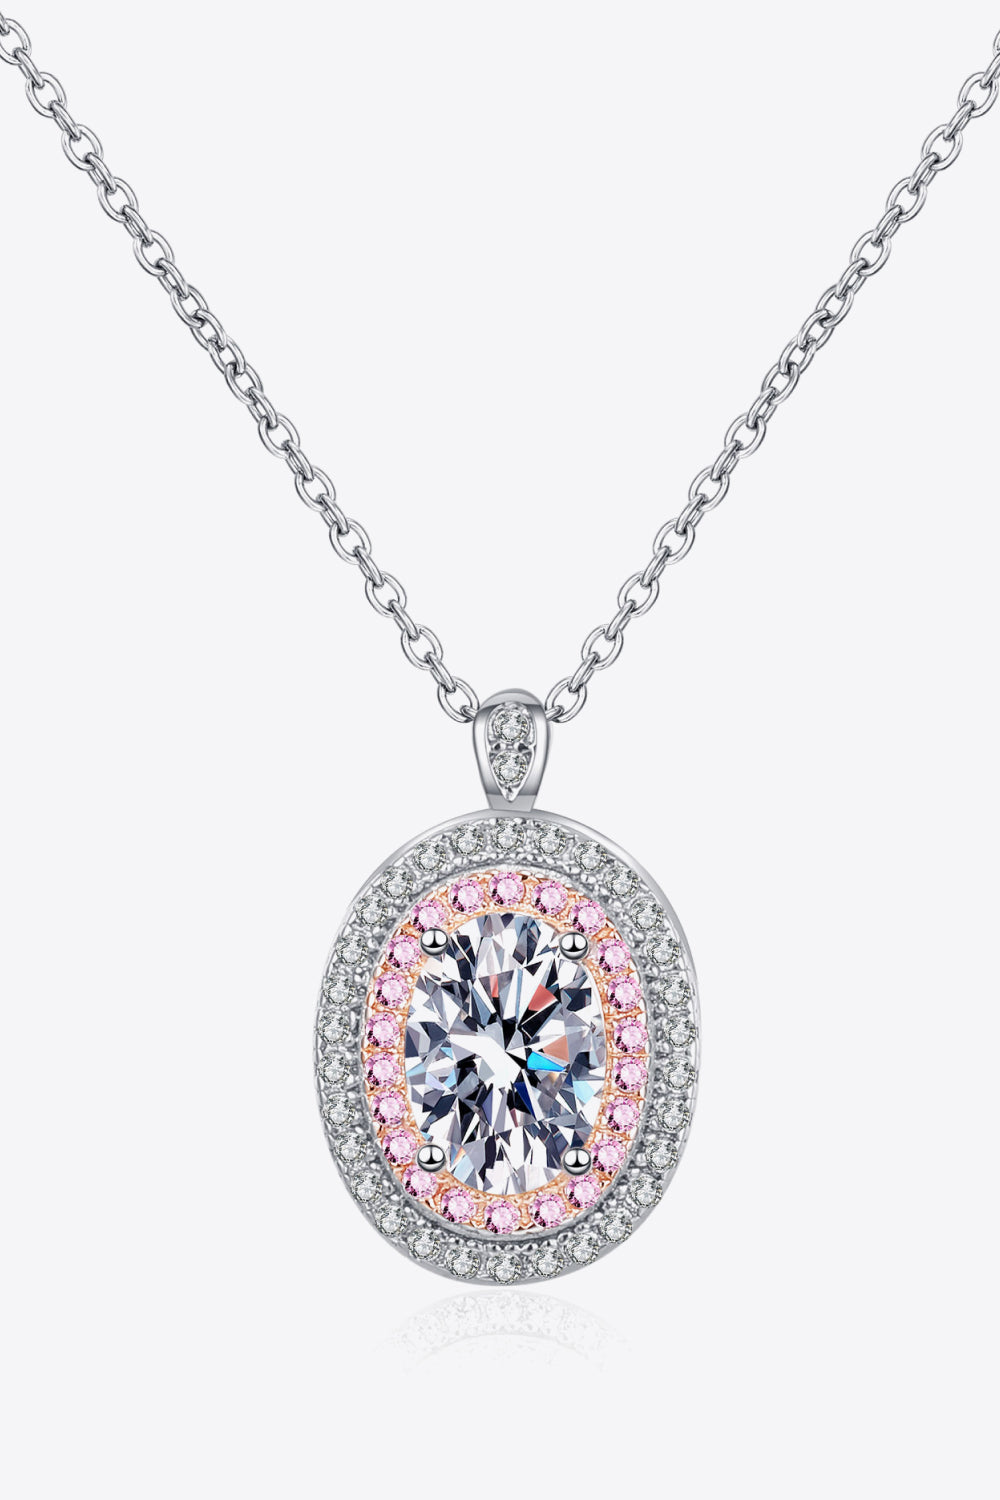 Women’s 925 Sterling Silver Rhodium-Plated 1 Carat Moissanite Pendant Necklace